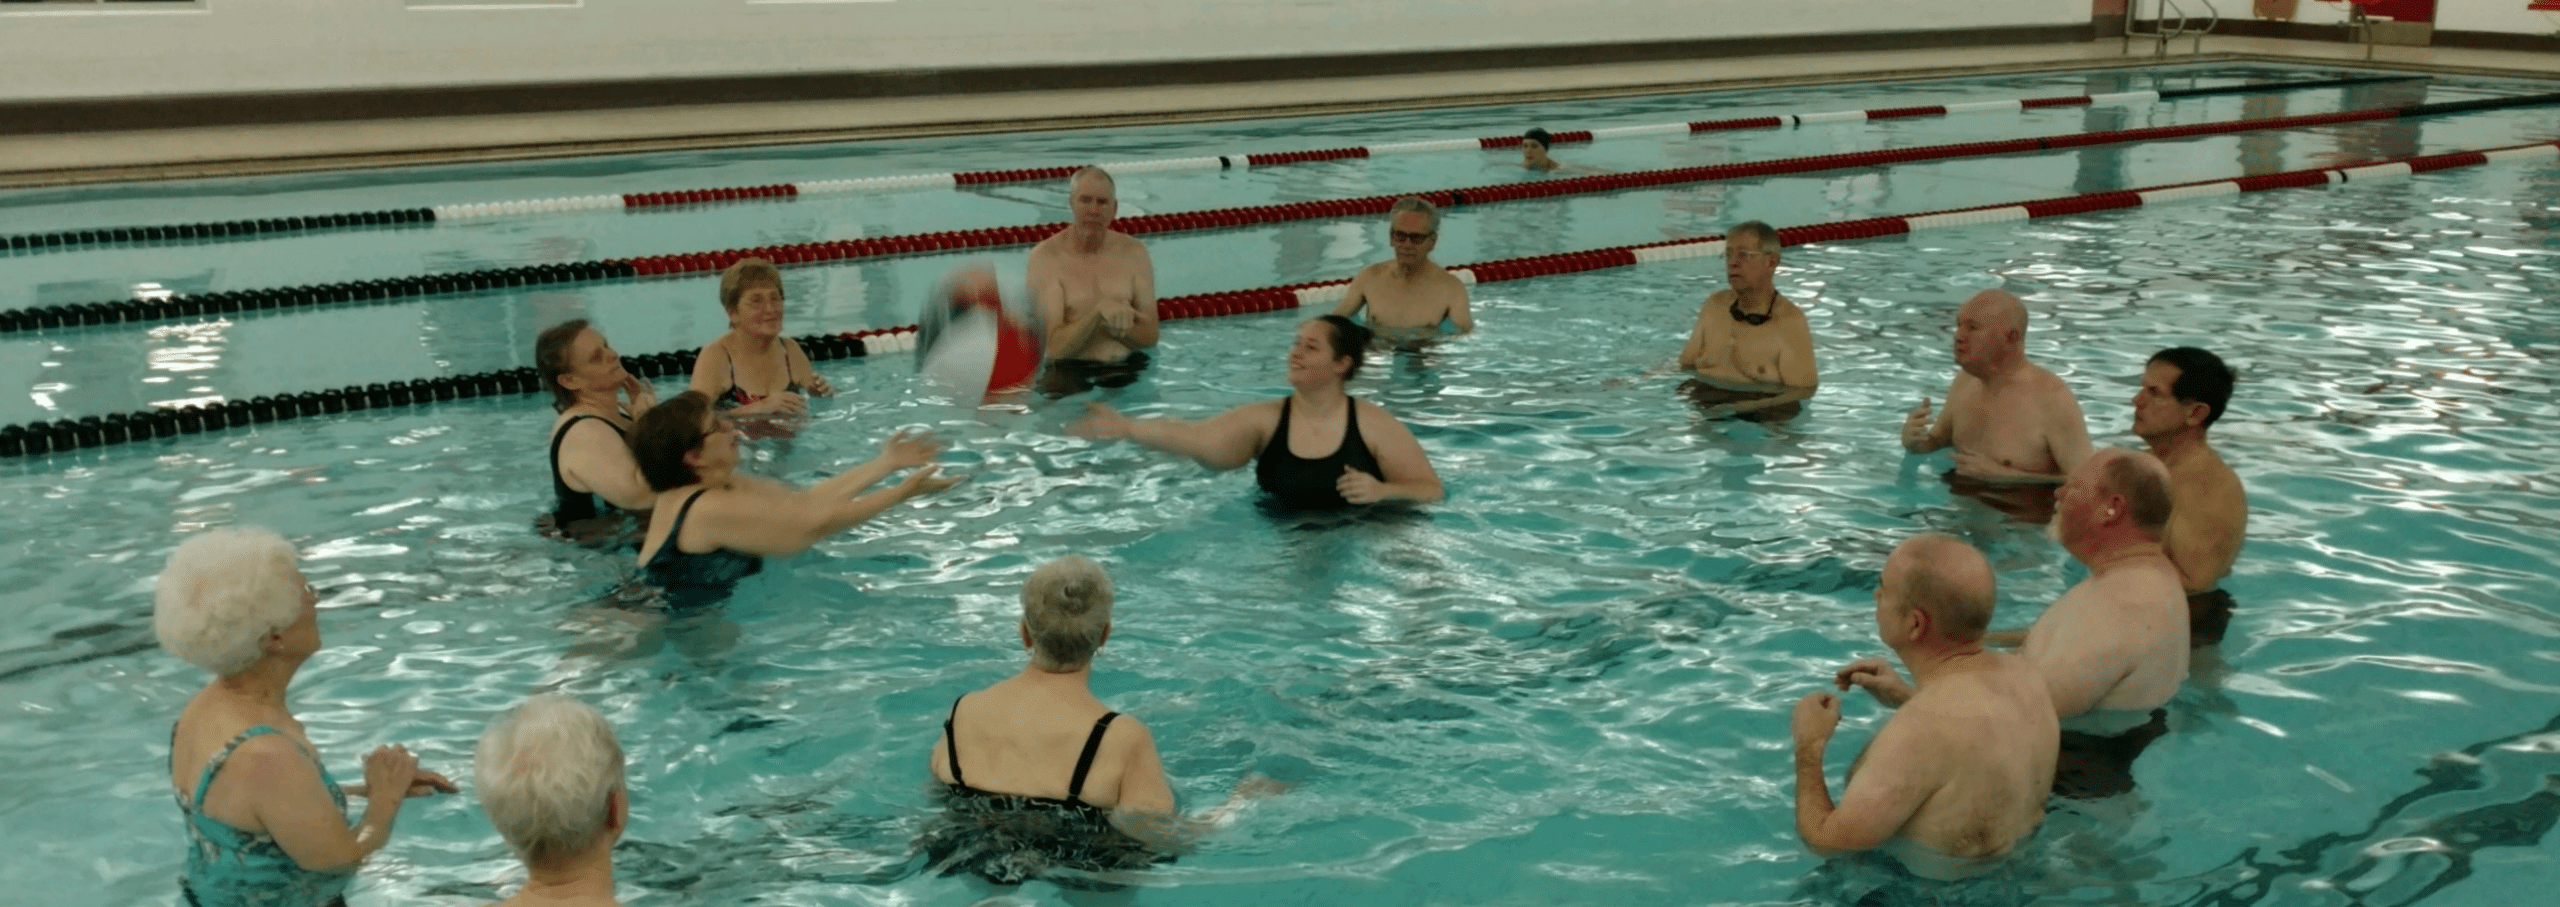 Swimmers Participating in a Group Excercise